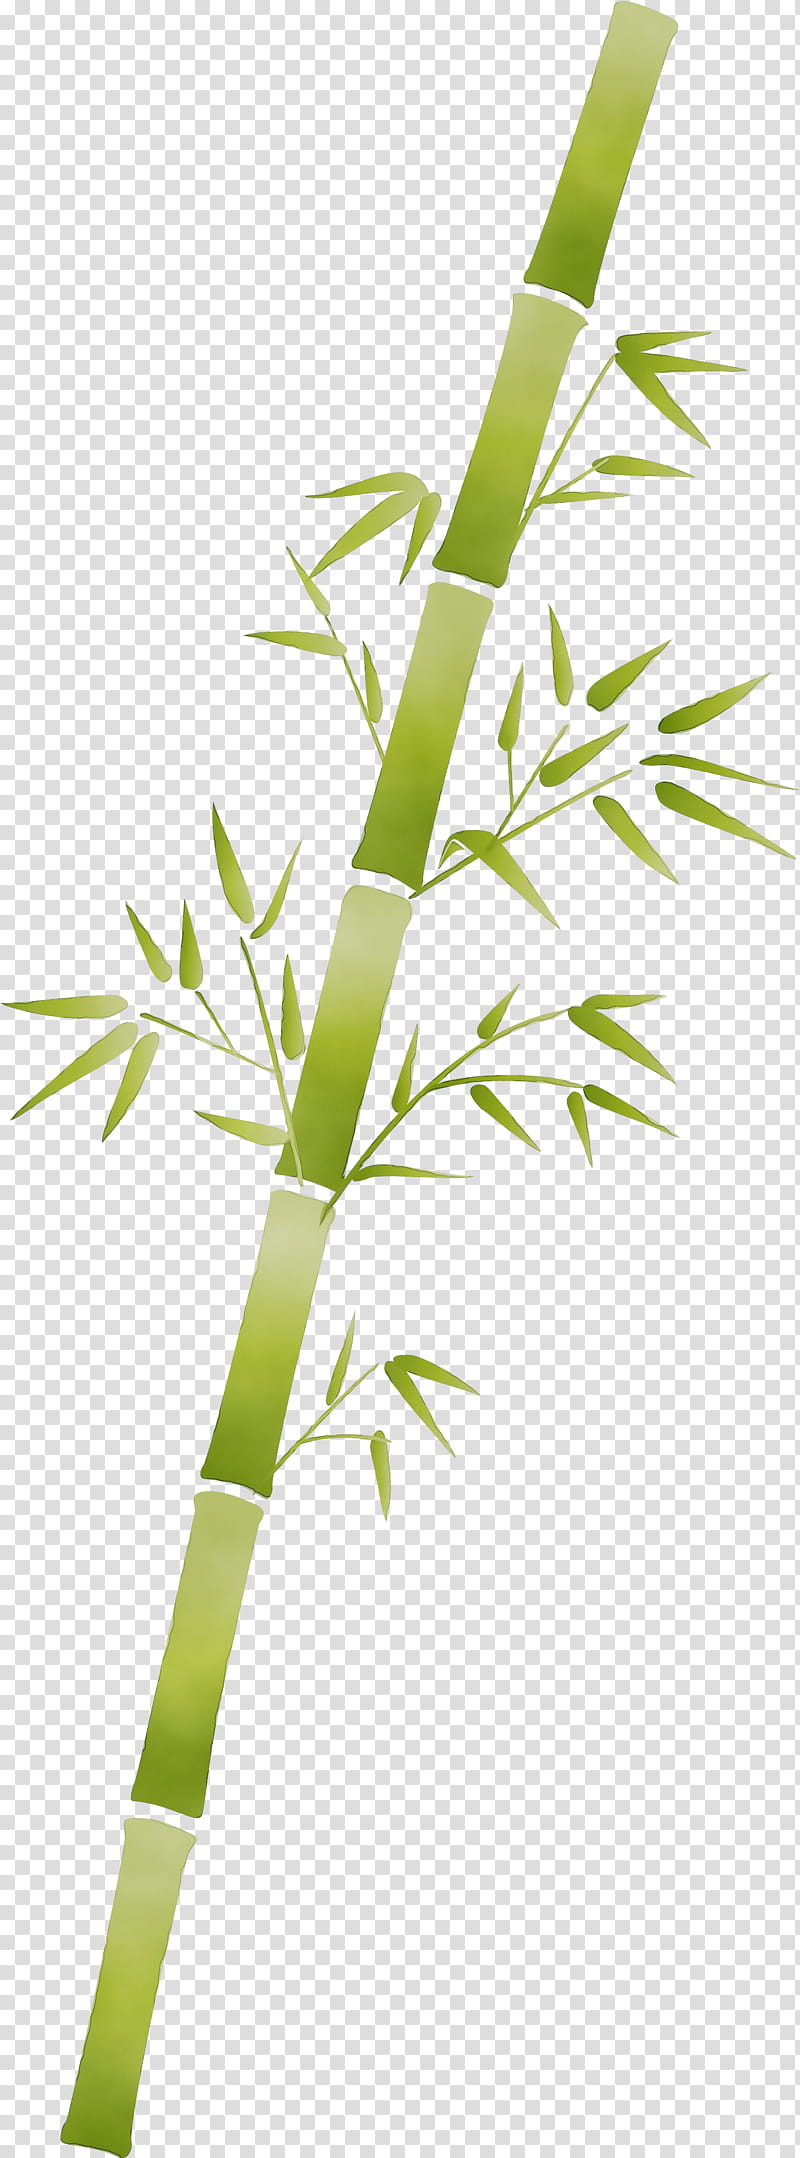 leaf plant plant stem bamboo flower, Watercolor, Paint, Wet Ink, Grass, Grass Family, Tree, Branch transparent background PNG clipart